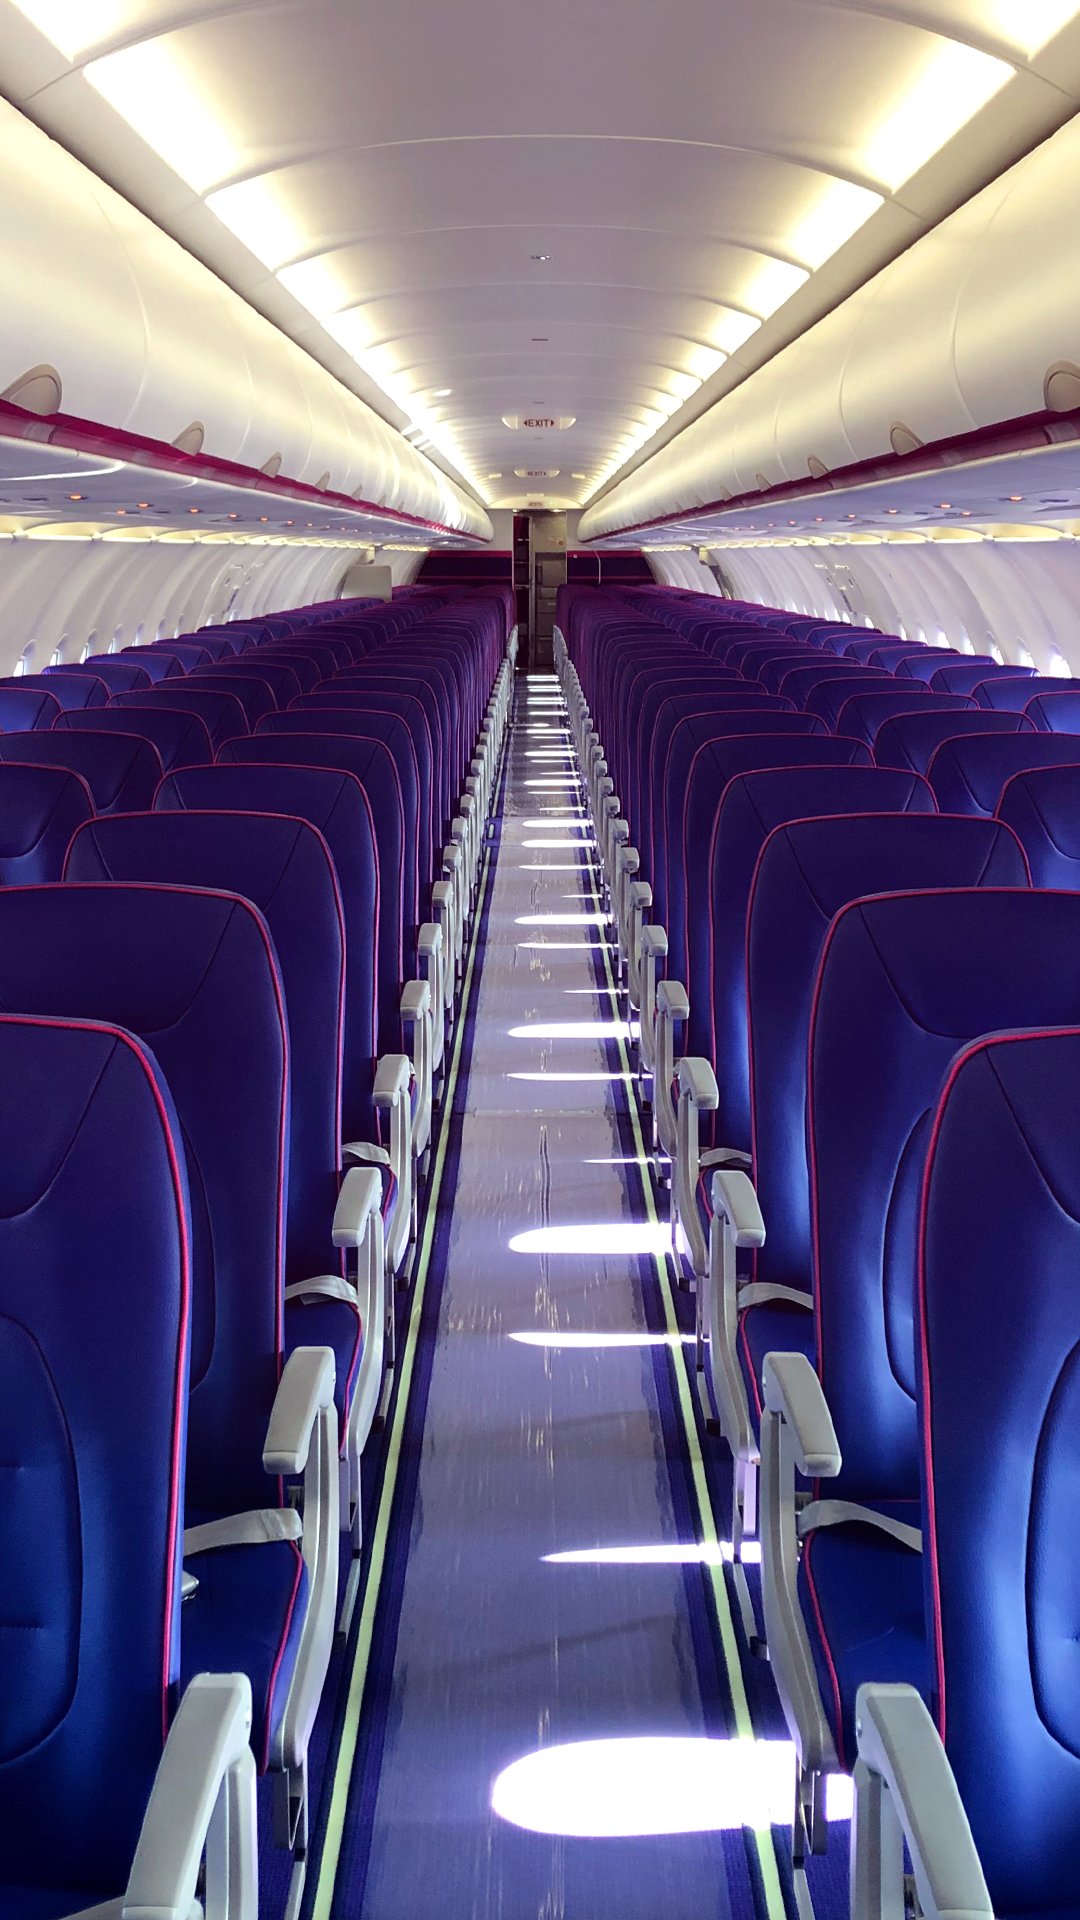 Wizz Air You Obsessed With Everything Related To Aviation? If You Just Can't Get Enough Of State Of The Art Aircraft, Then Let Us Provide You With A Quick Fix! Download These